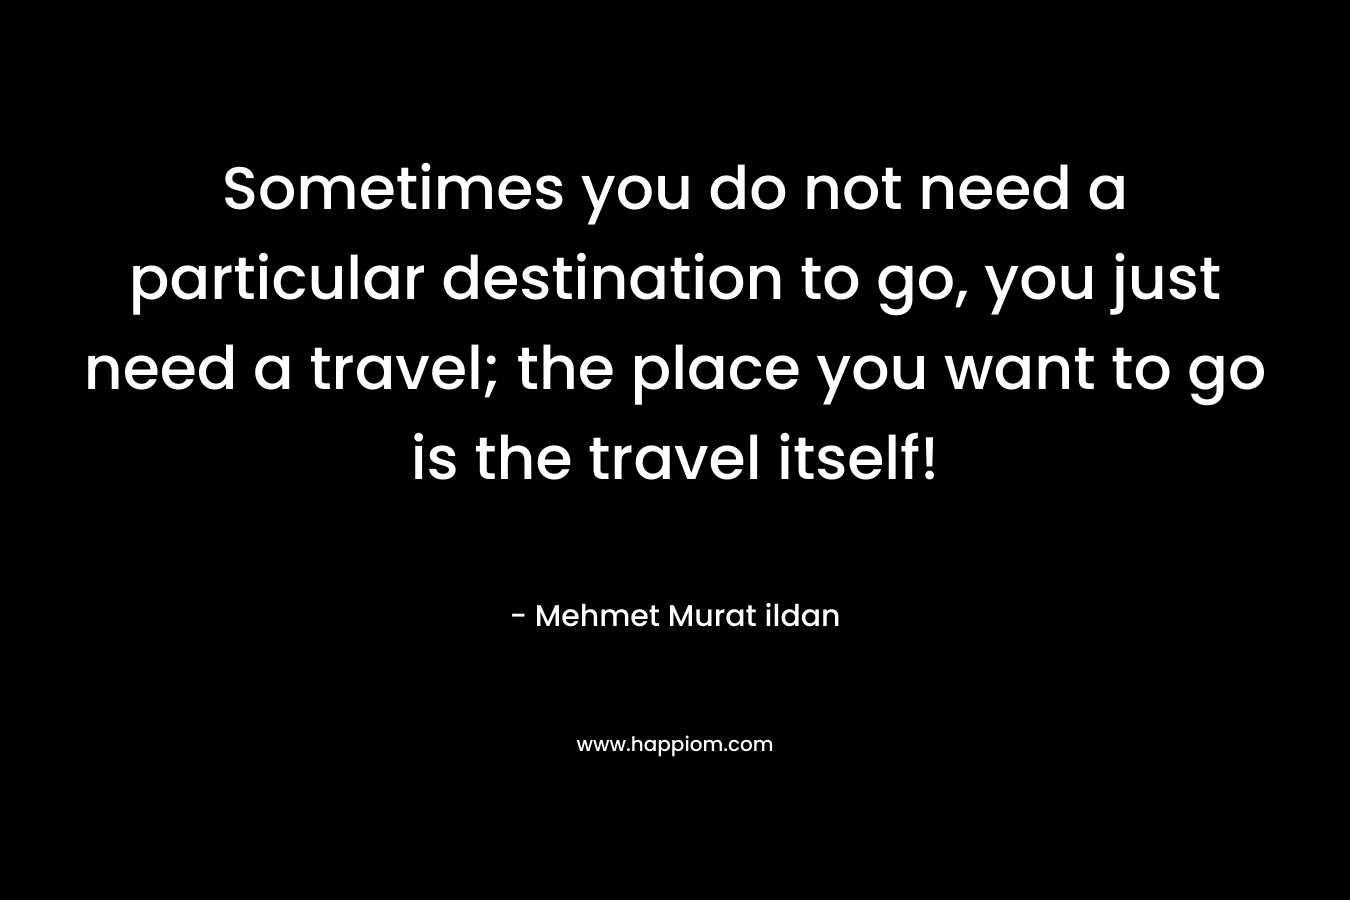 Sometimes you do not need a particular destination to go, you just need a travel; the place you want to go is the travel itself!